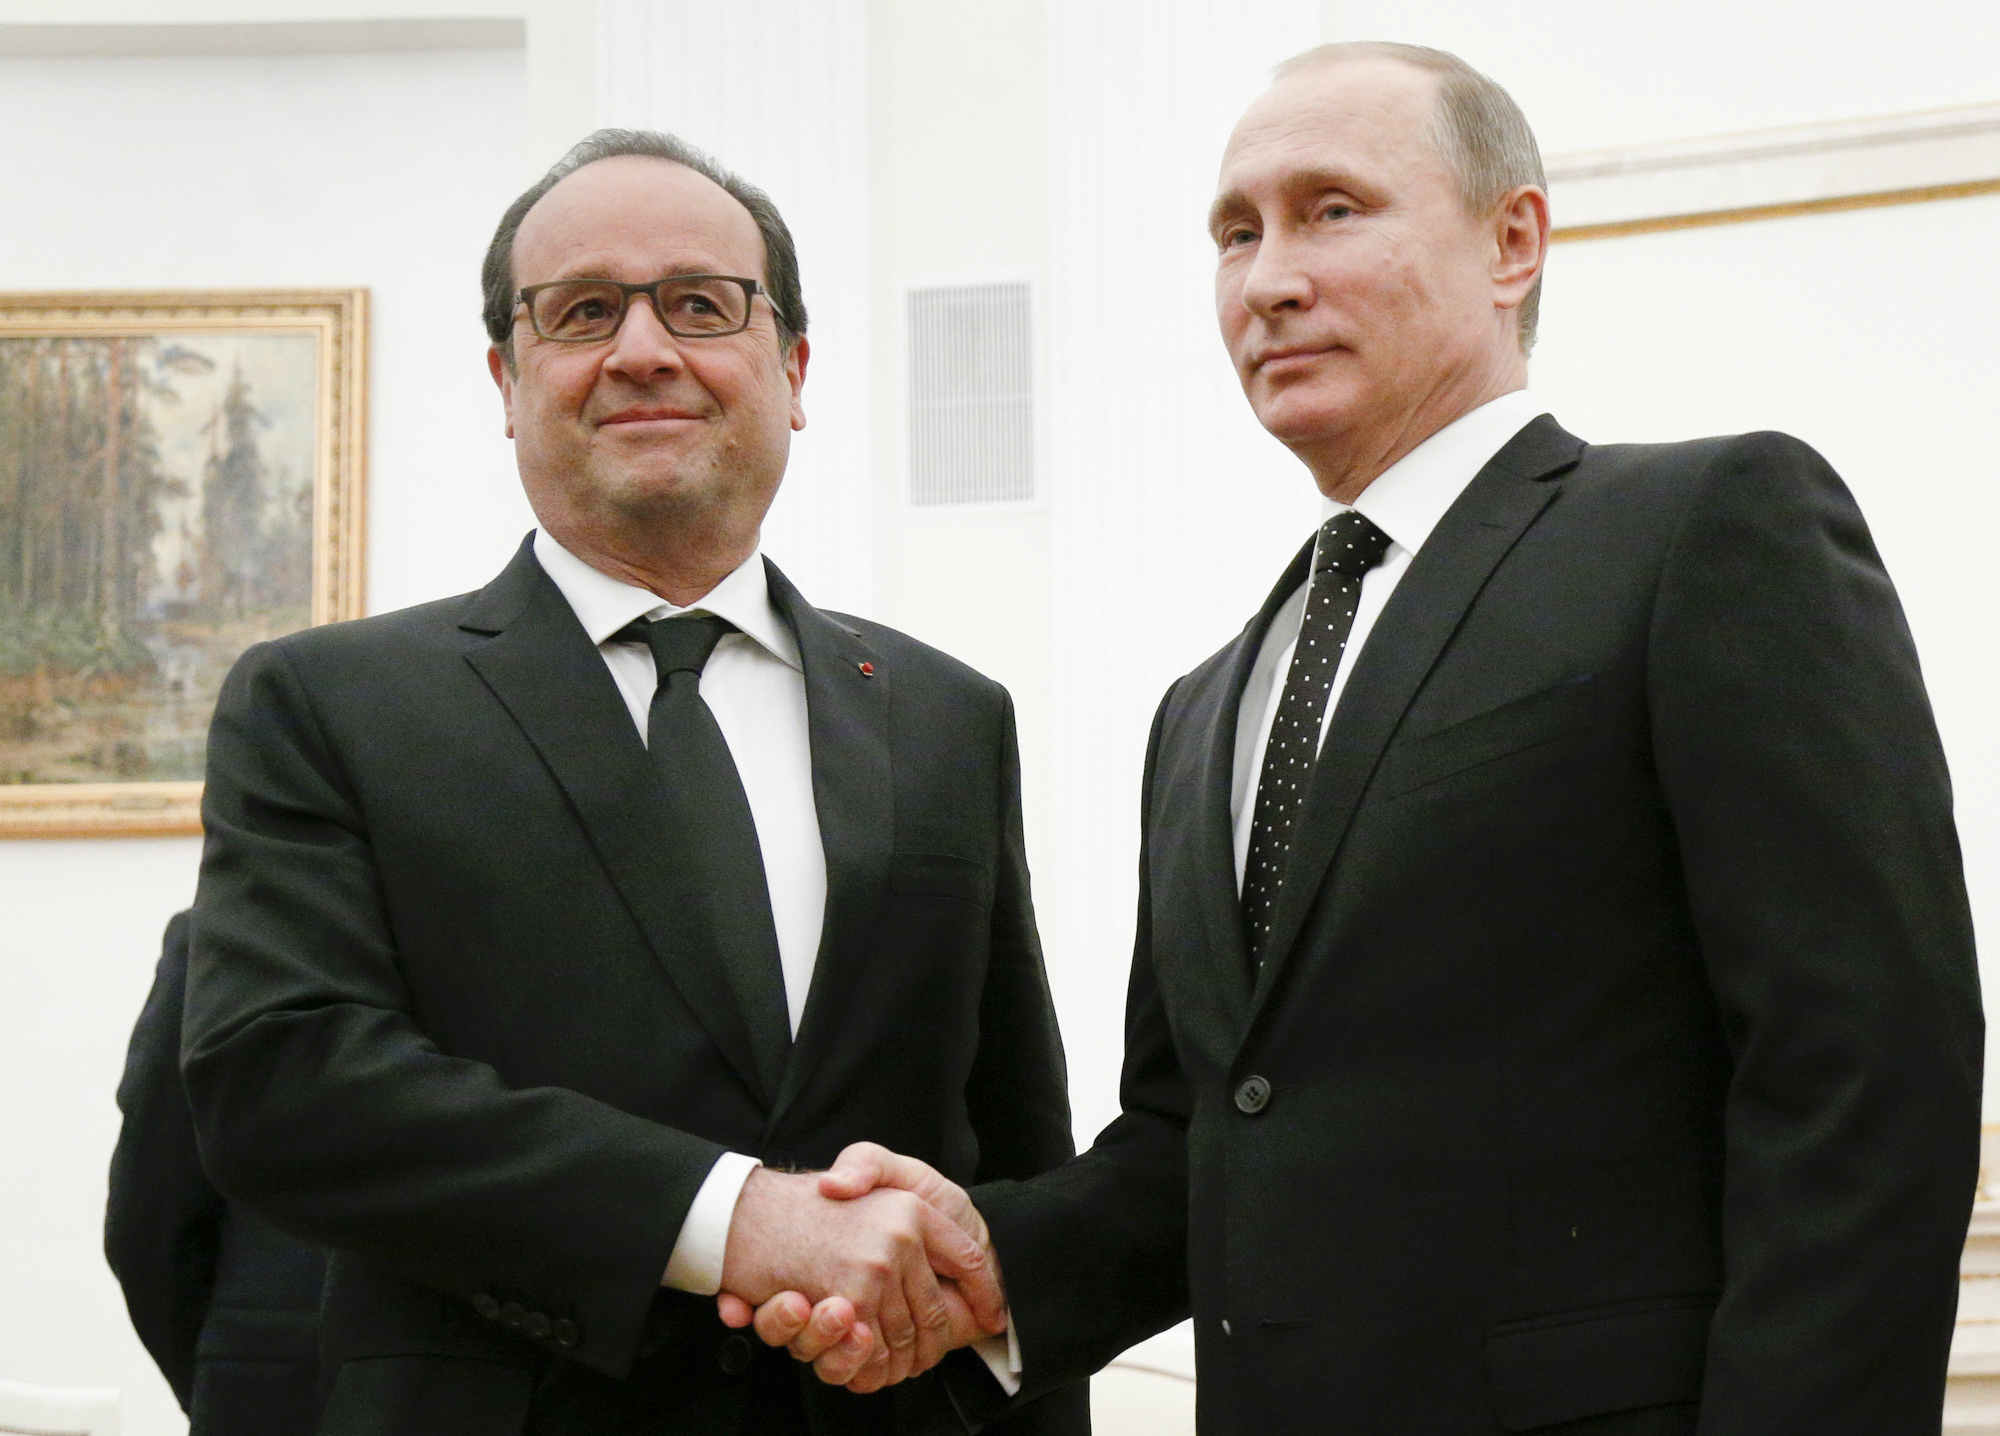 In this Thursday, Nov. 26, 2015 file photo, Russian President Vladimir Putin, right, shakes hands with his French counterpart Francois Hollande during their meeting in Moscow, Russia. (AP Photo/Alexander Zemlianichenko, Pool, File) (Alexander Zemlianichenko&mdash;AP)